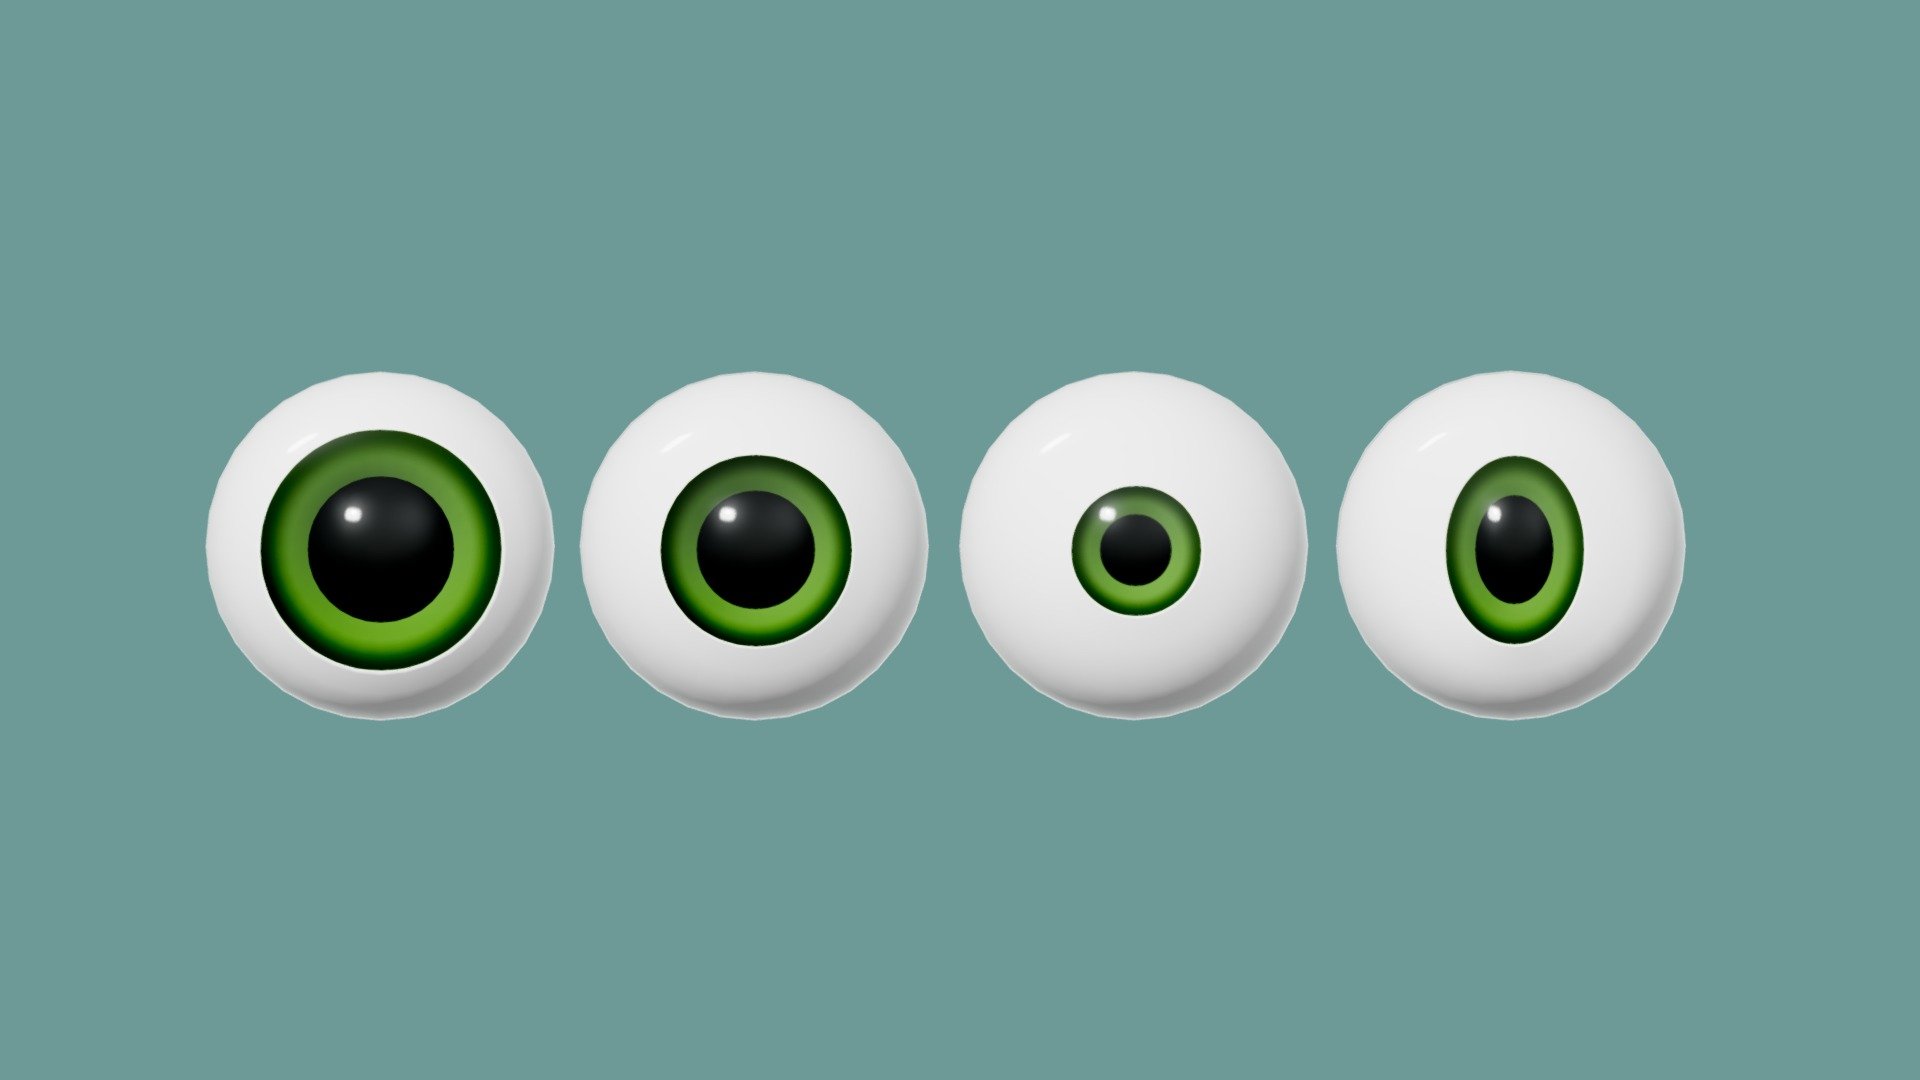 Low-poly eyes created with Blender 3d model